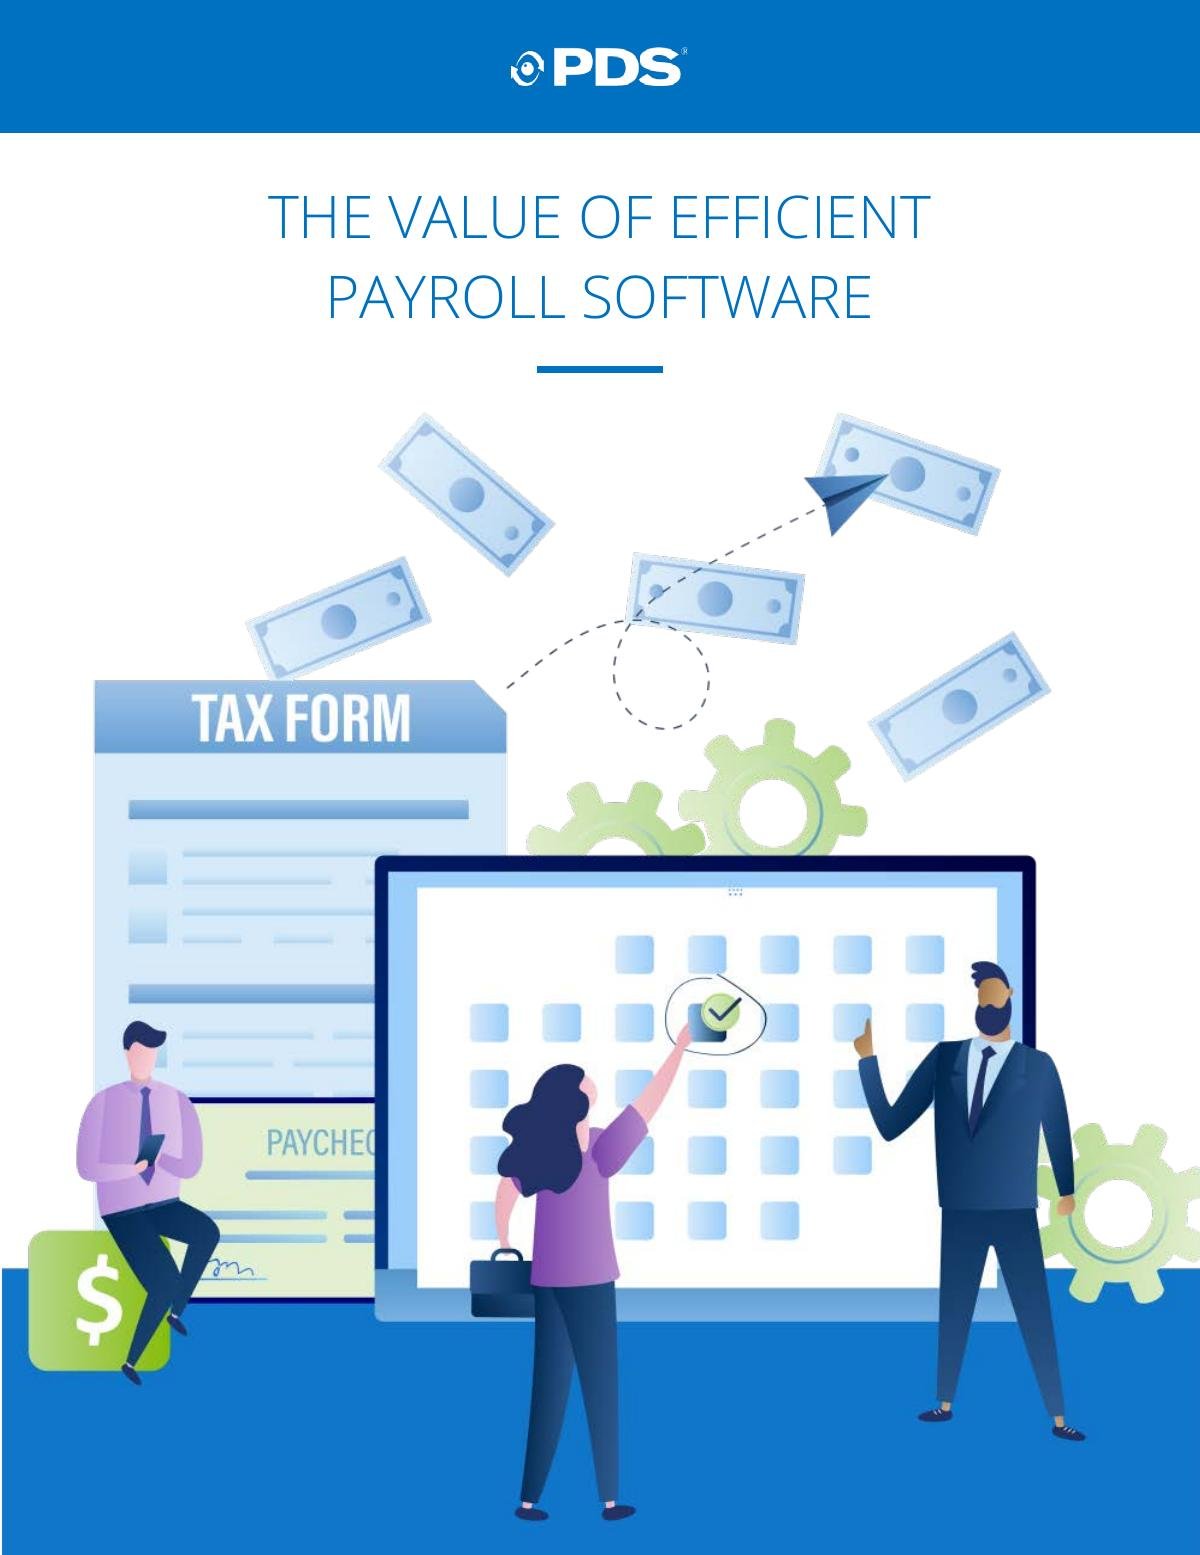 The Value of Efficient Payroll